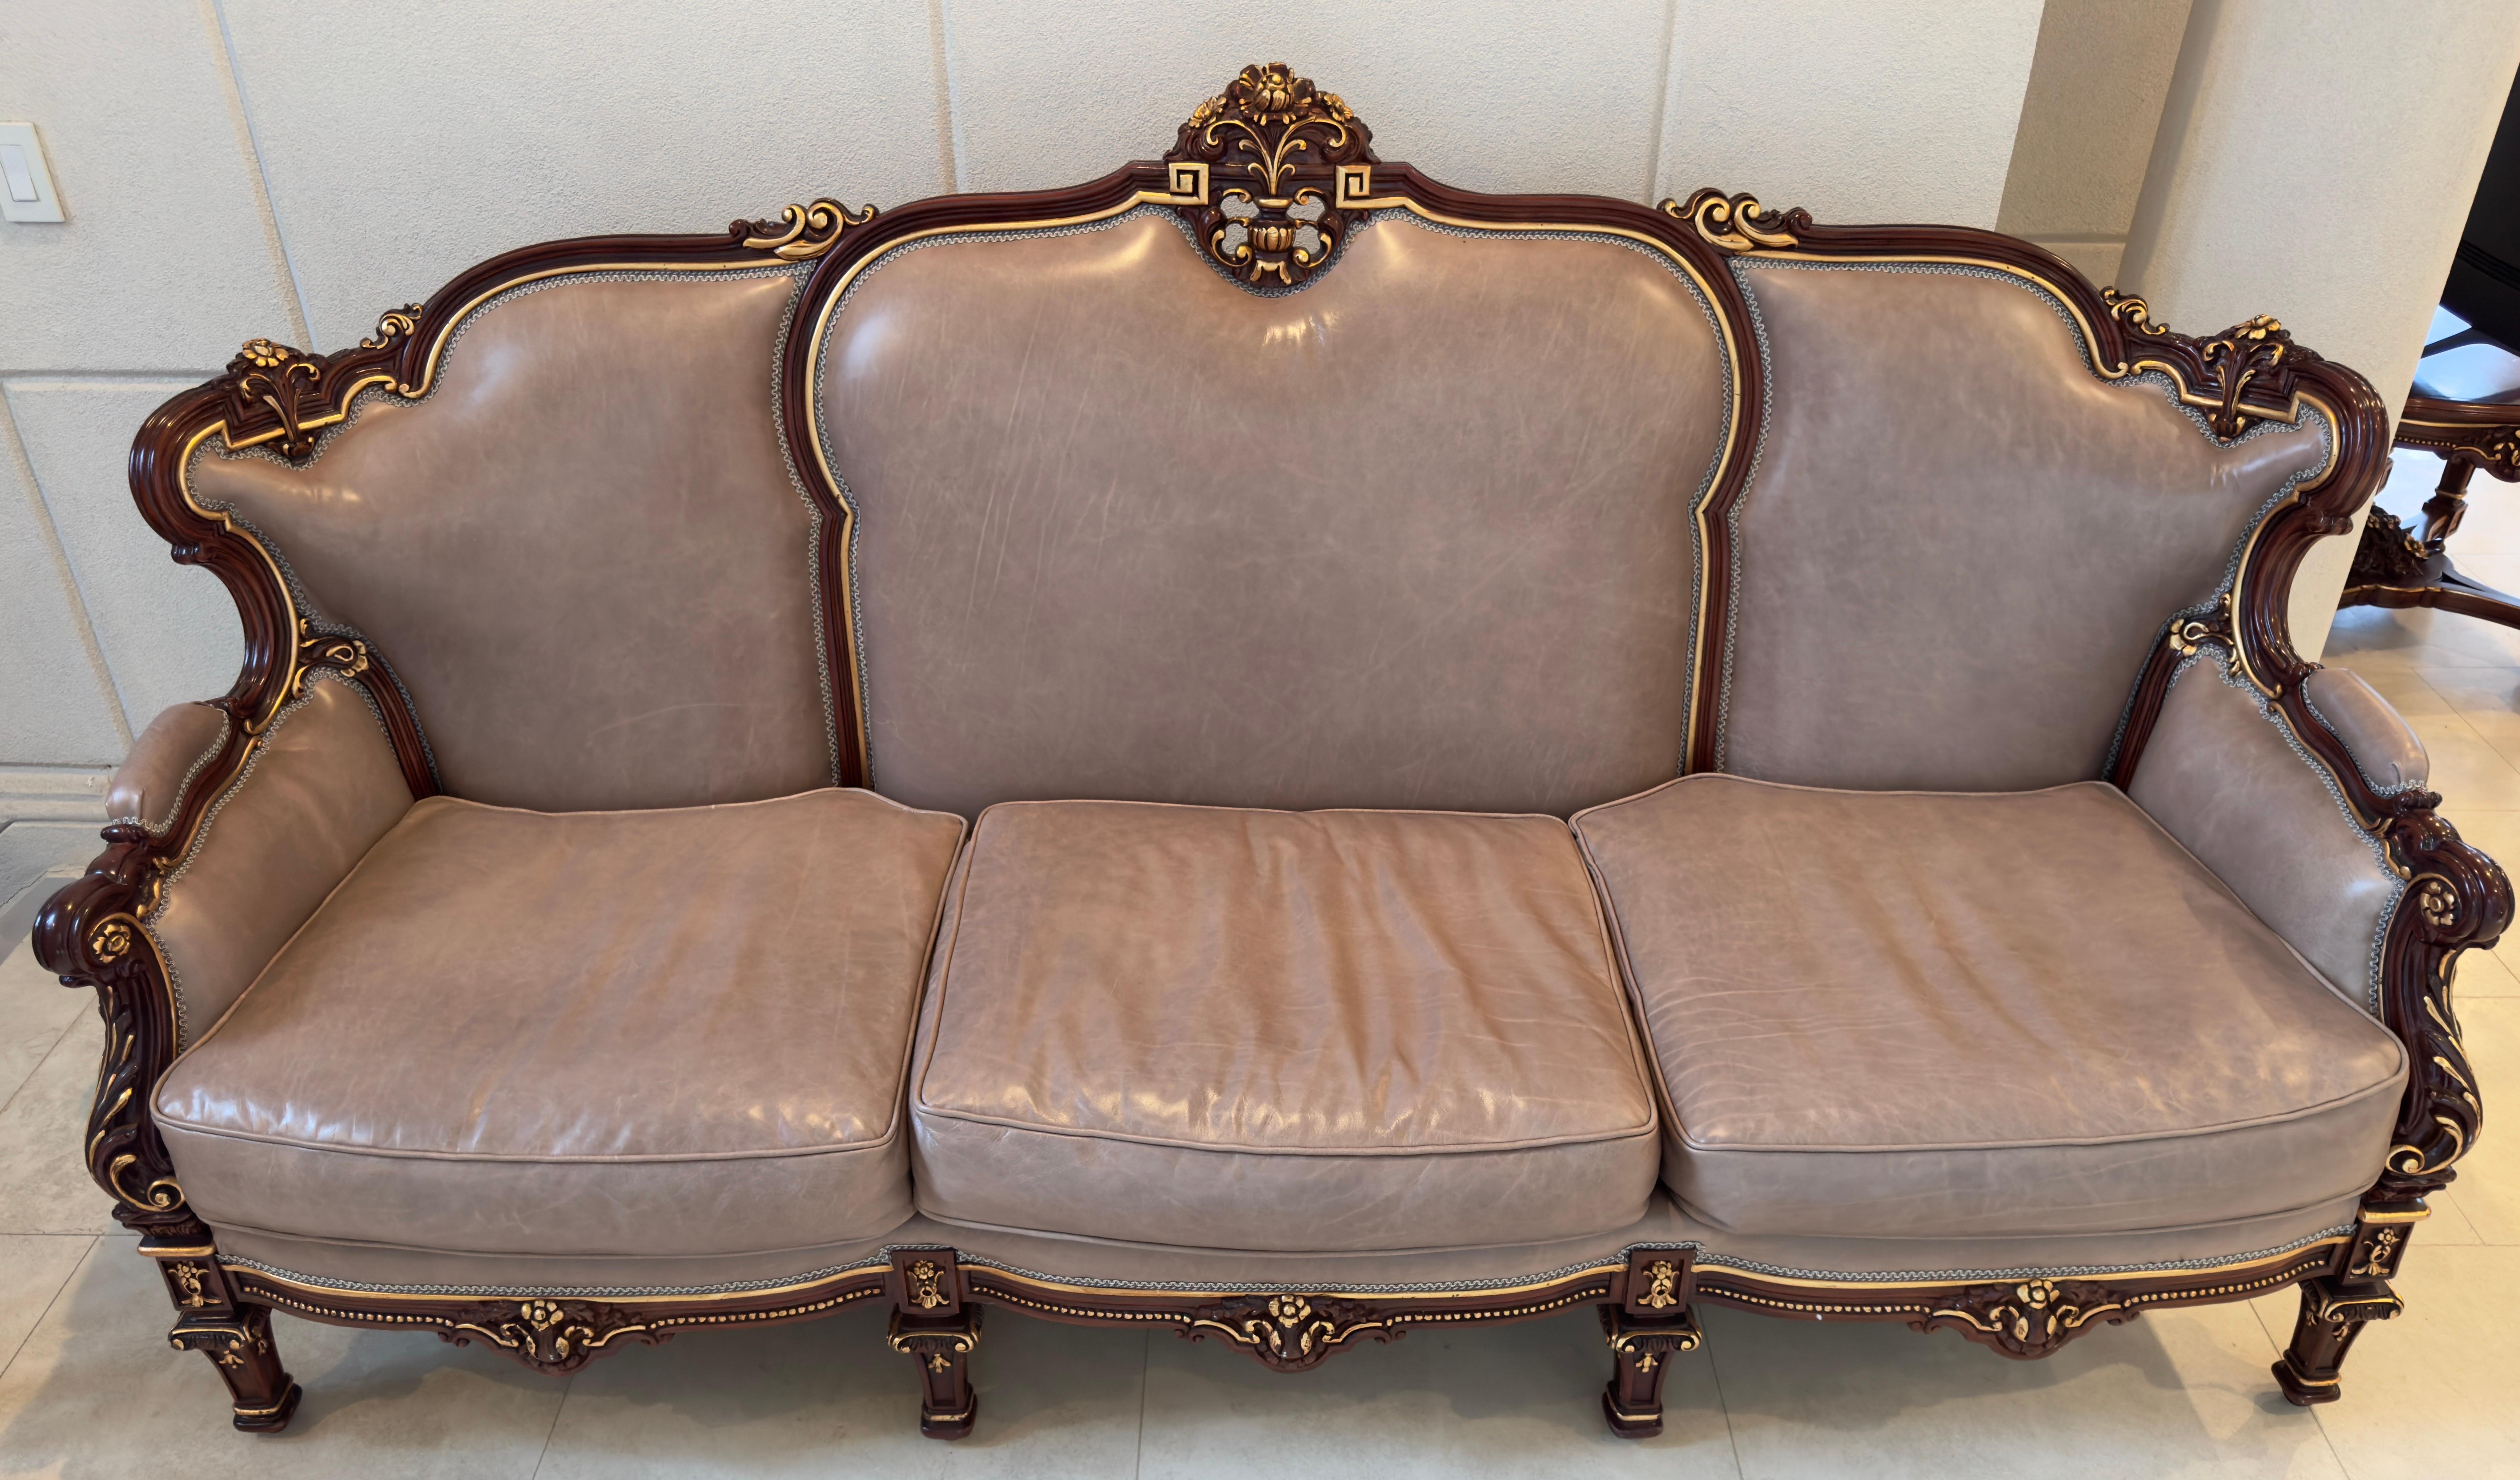 An exquisite Italian Rococo Style leather and mahogany sofa. Imbued with the essence of opulence, this sofa is a symphony of fine craftsmanship and timeless design.
Fashioned from the finest mahogany, the frame of this sofa is a work of art in